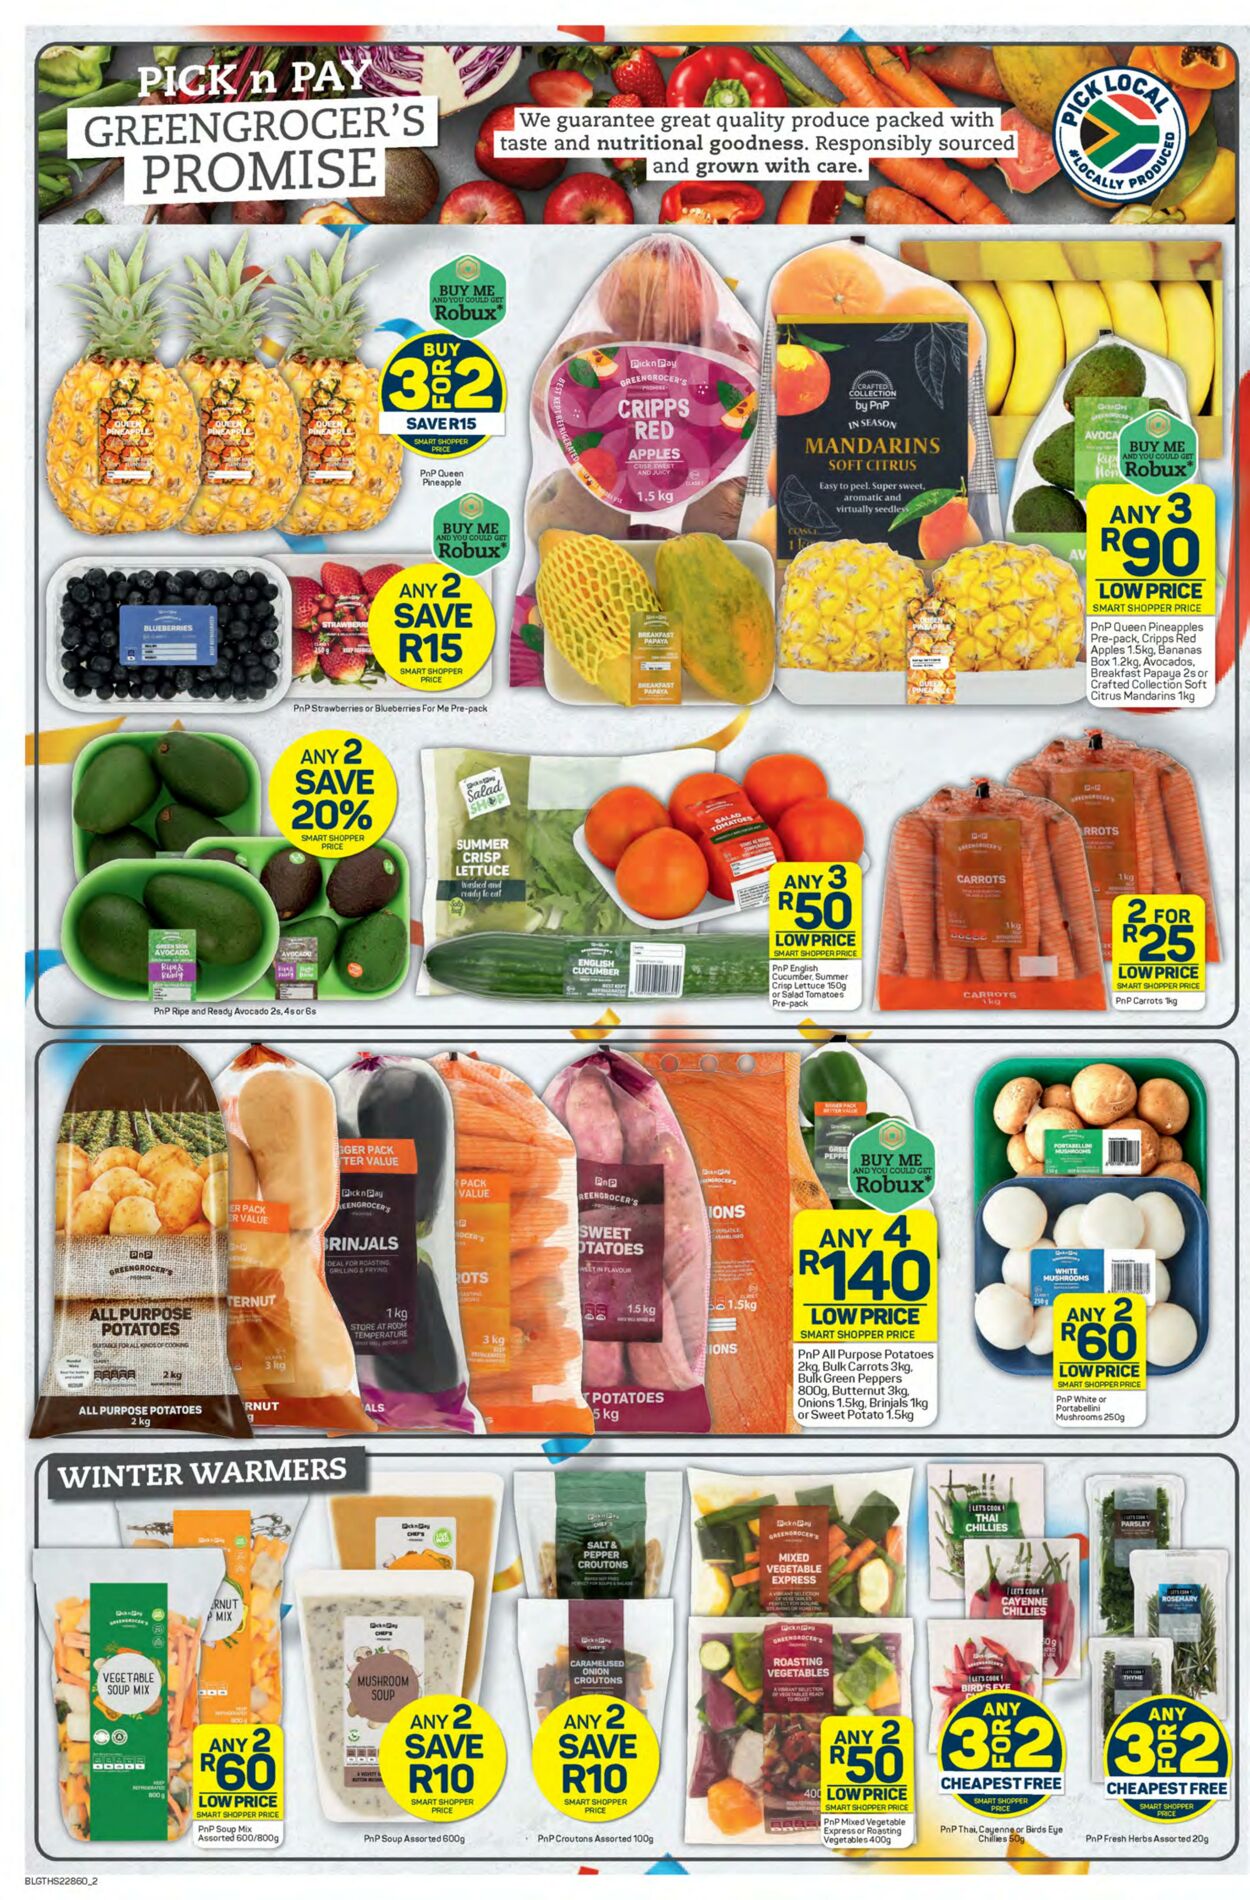 Pick n Pay Promotional Leaflet - GAUTENG - Valid from 26.06 to 02.07 ...